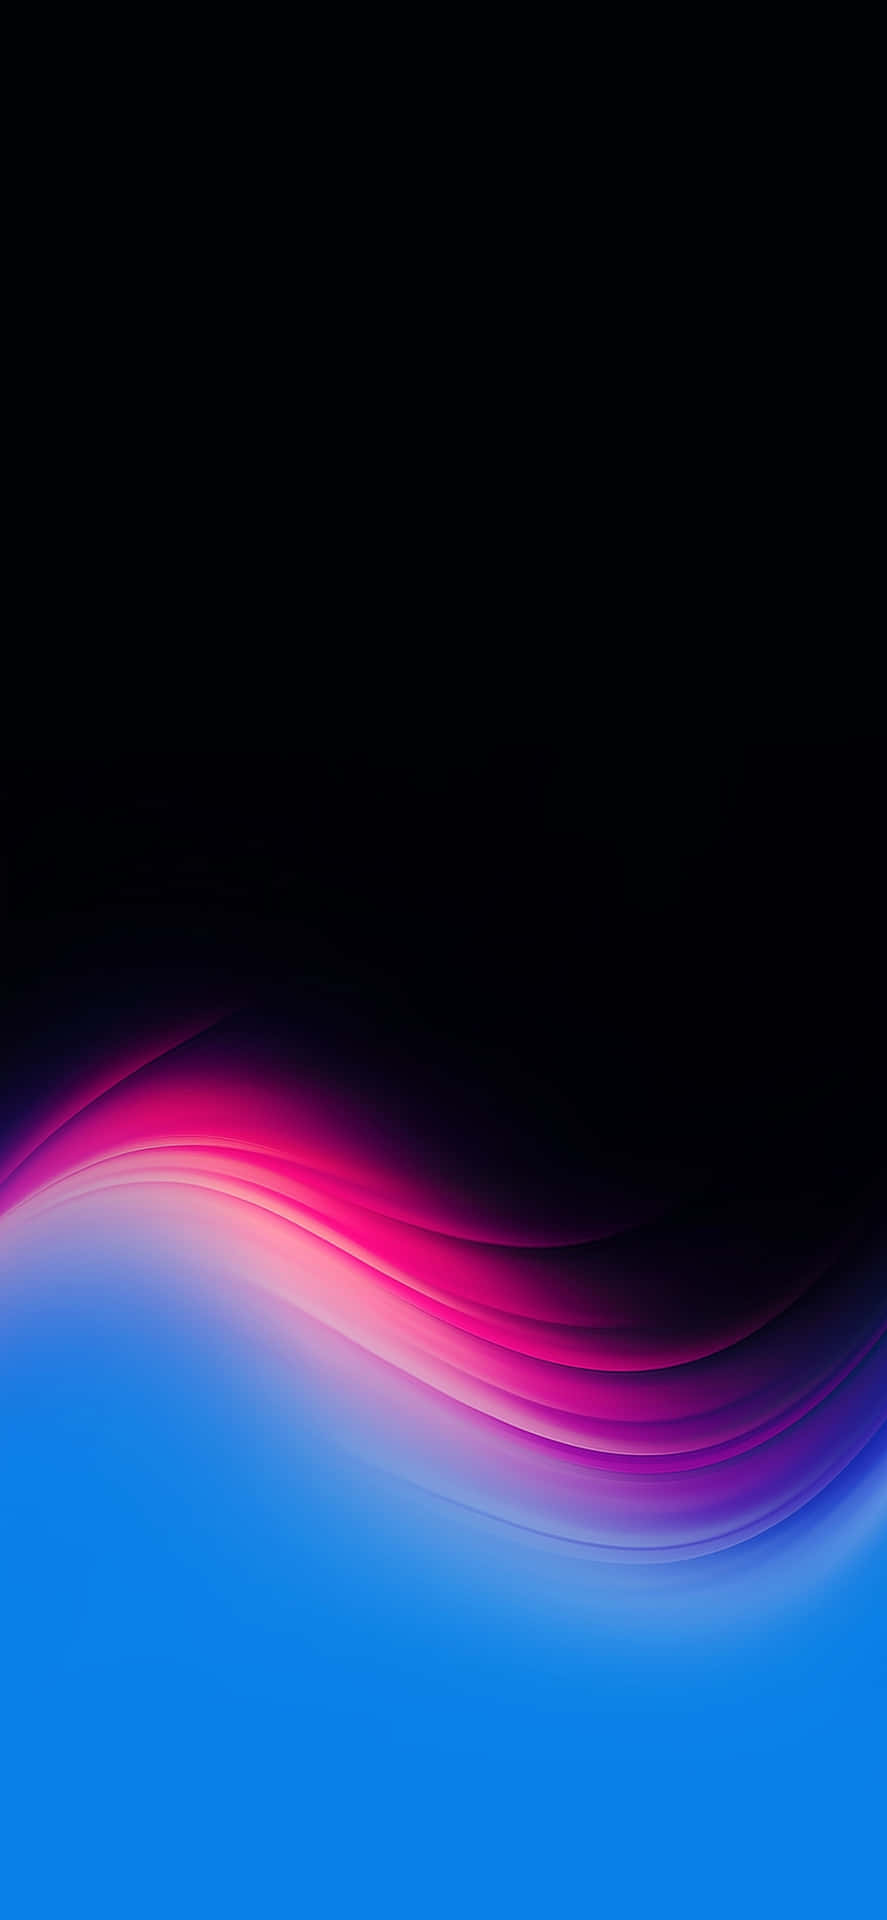 Experience the beauty of OLED Technology with this stunning wallpaper